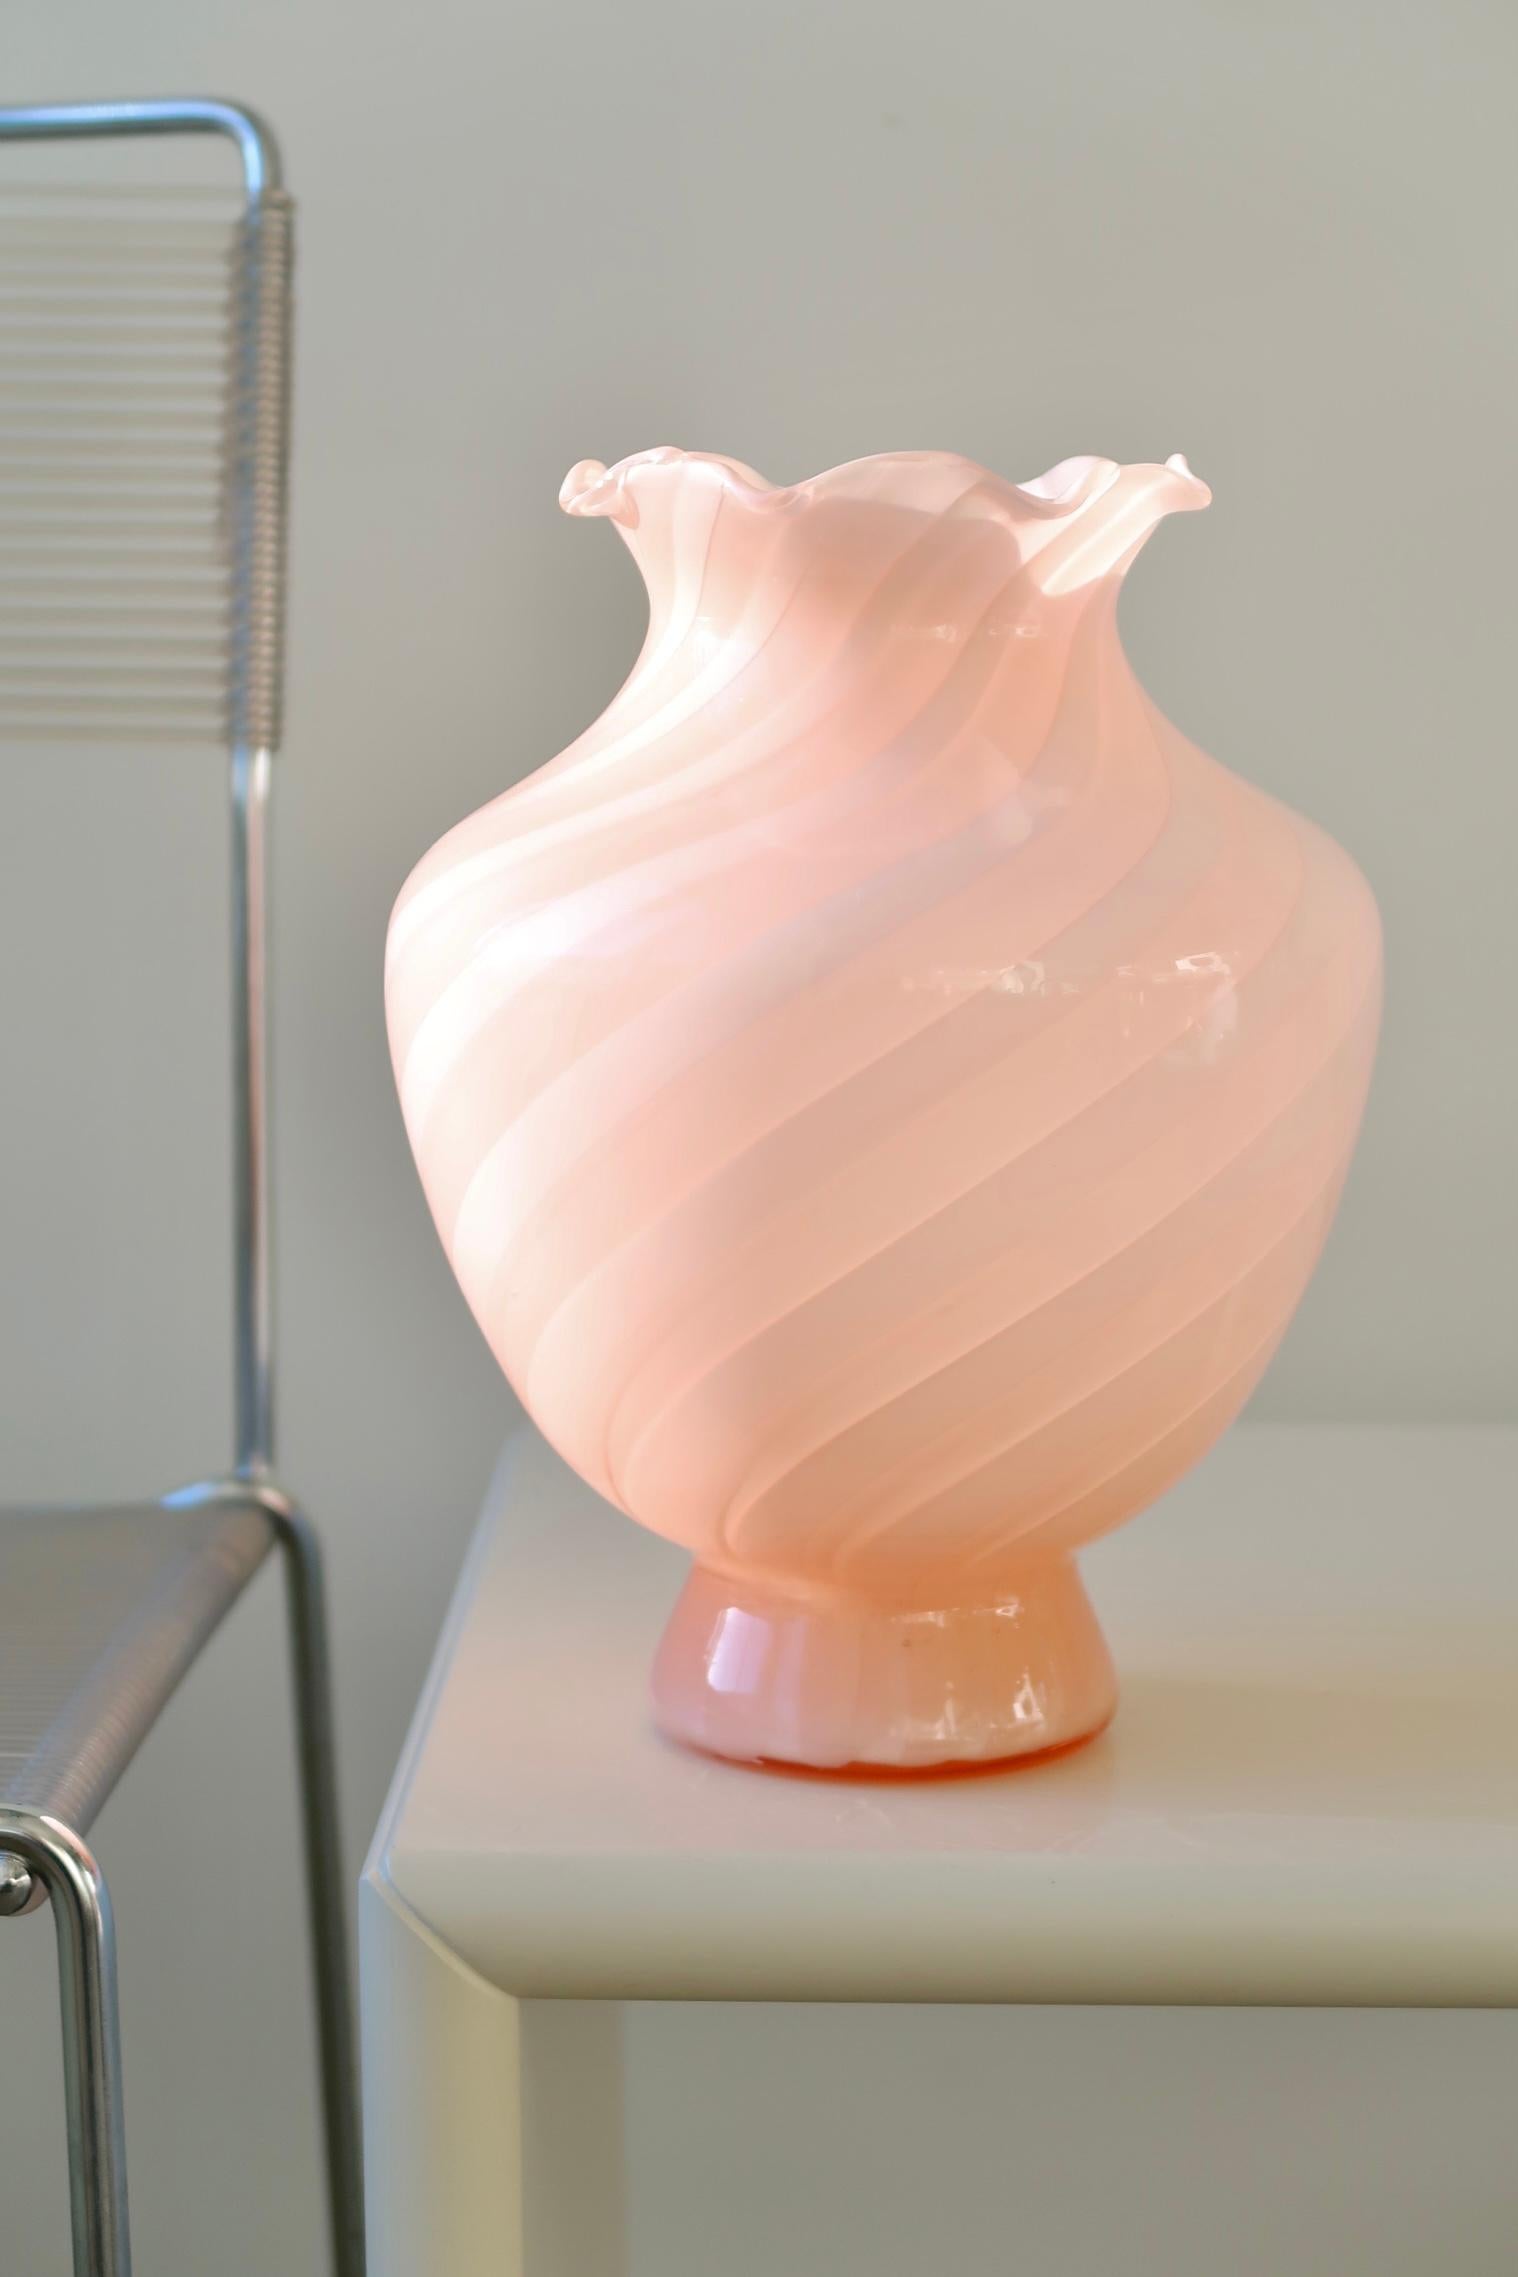 Large vintage Murano glass vase with swirl. Mouth-blown in pink glass in a sculptural form. Appears in very good condition with original label. Handmade in Italy, 1970s. Measures: H:26cm D:19cm.